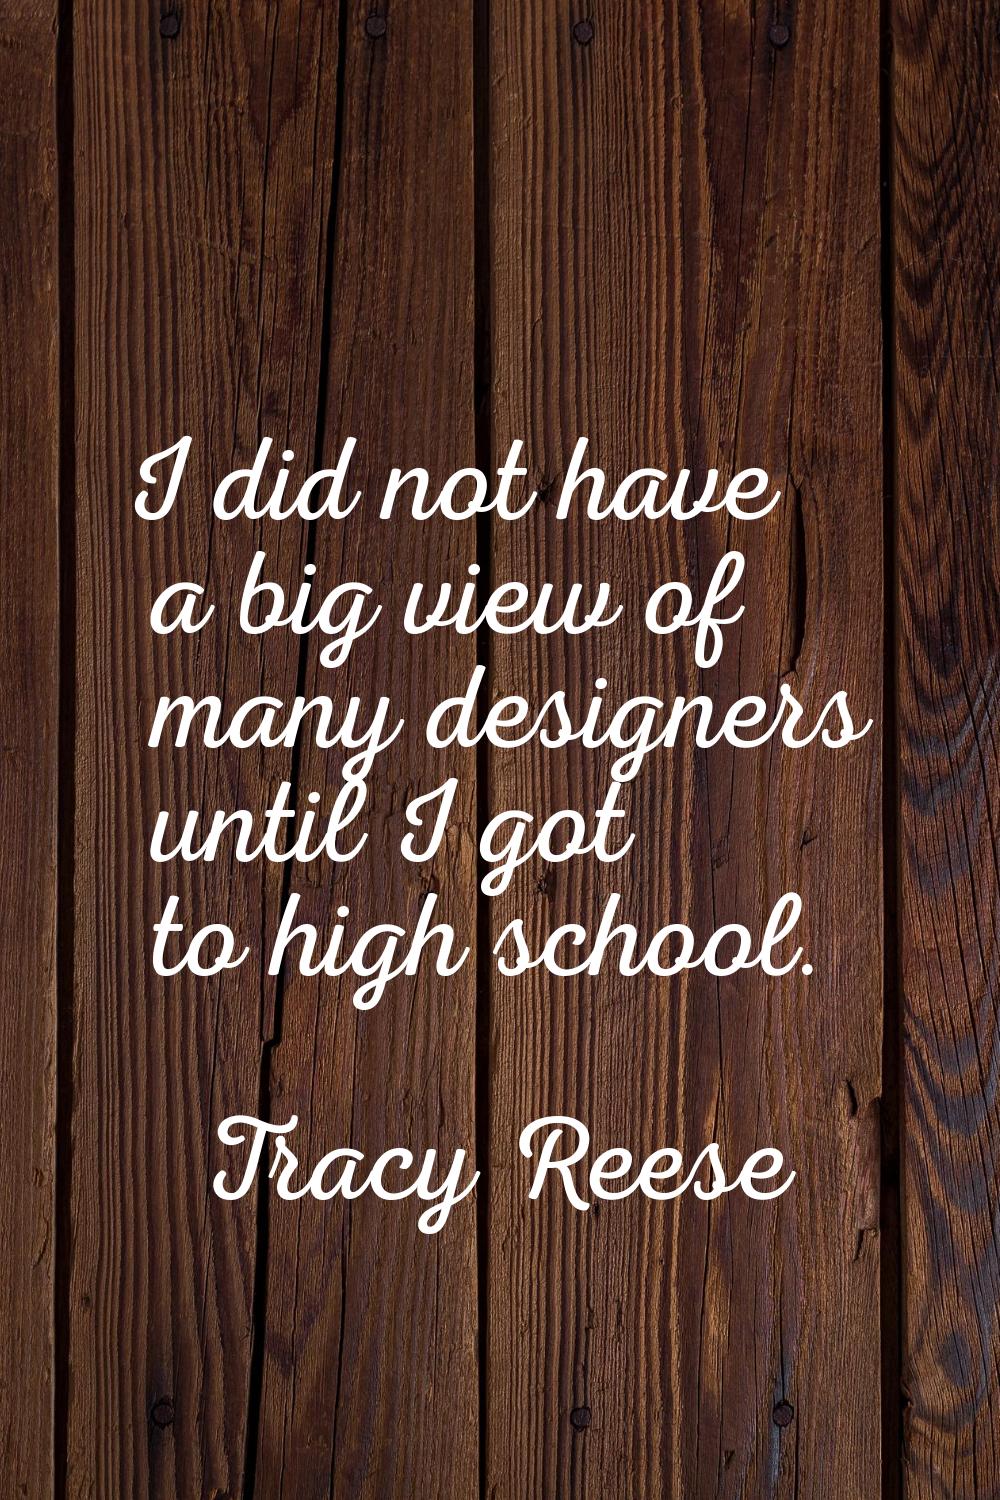 I did not have a big view of many designers until I got to high school.